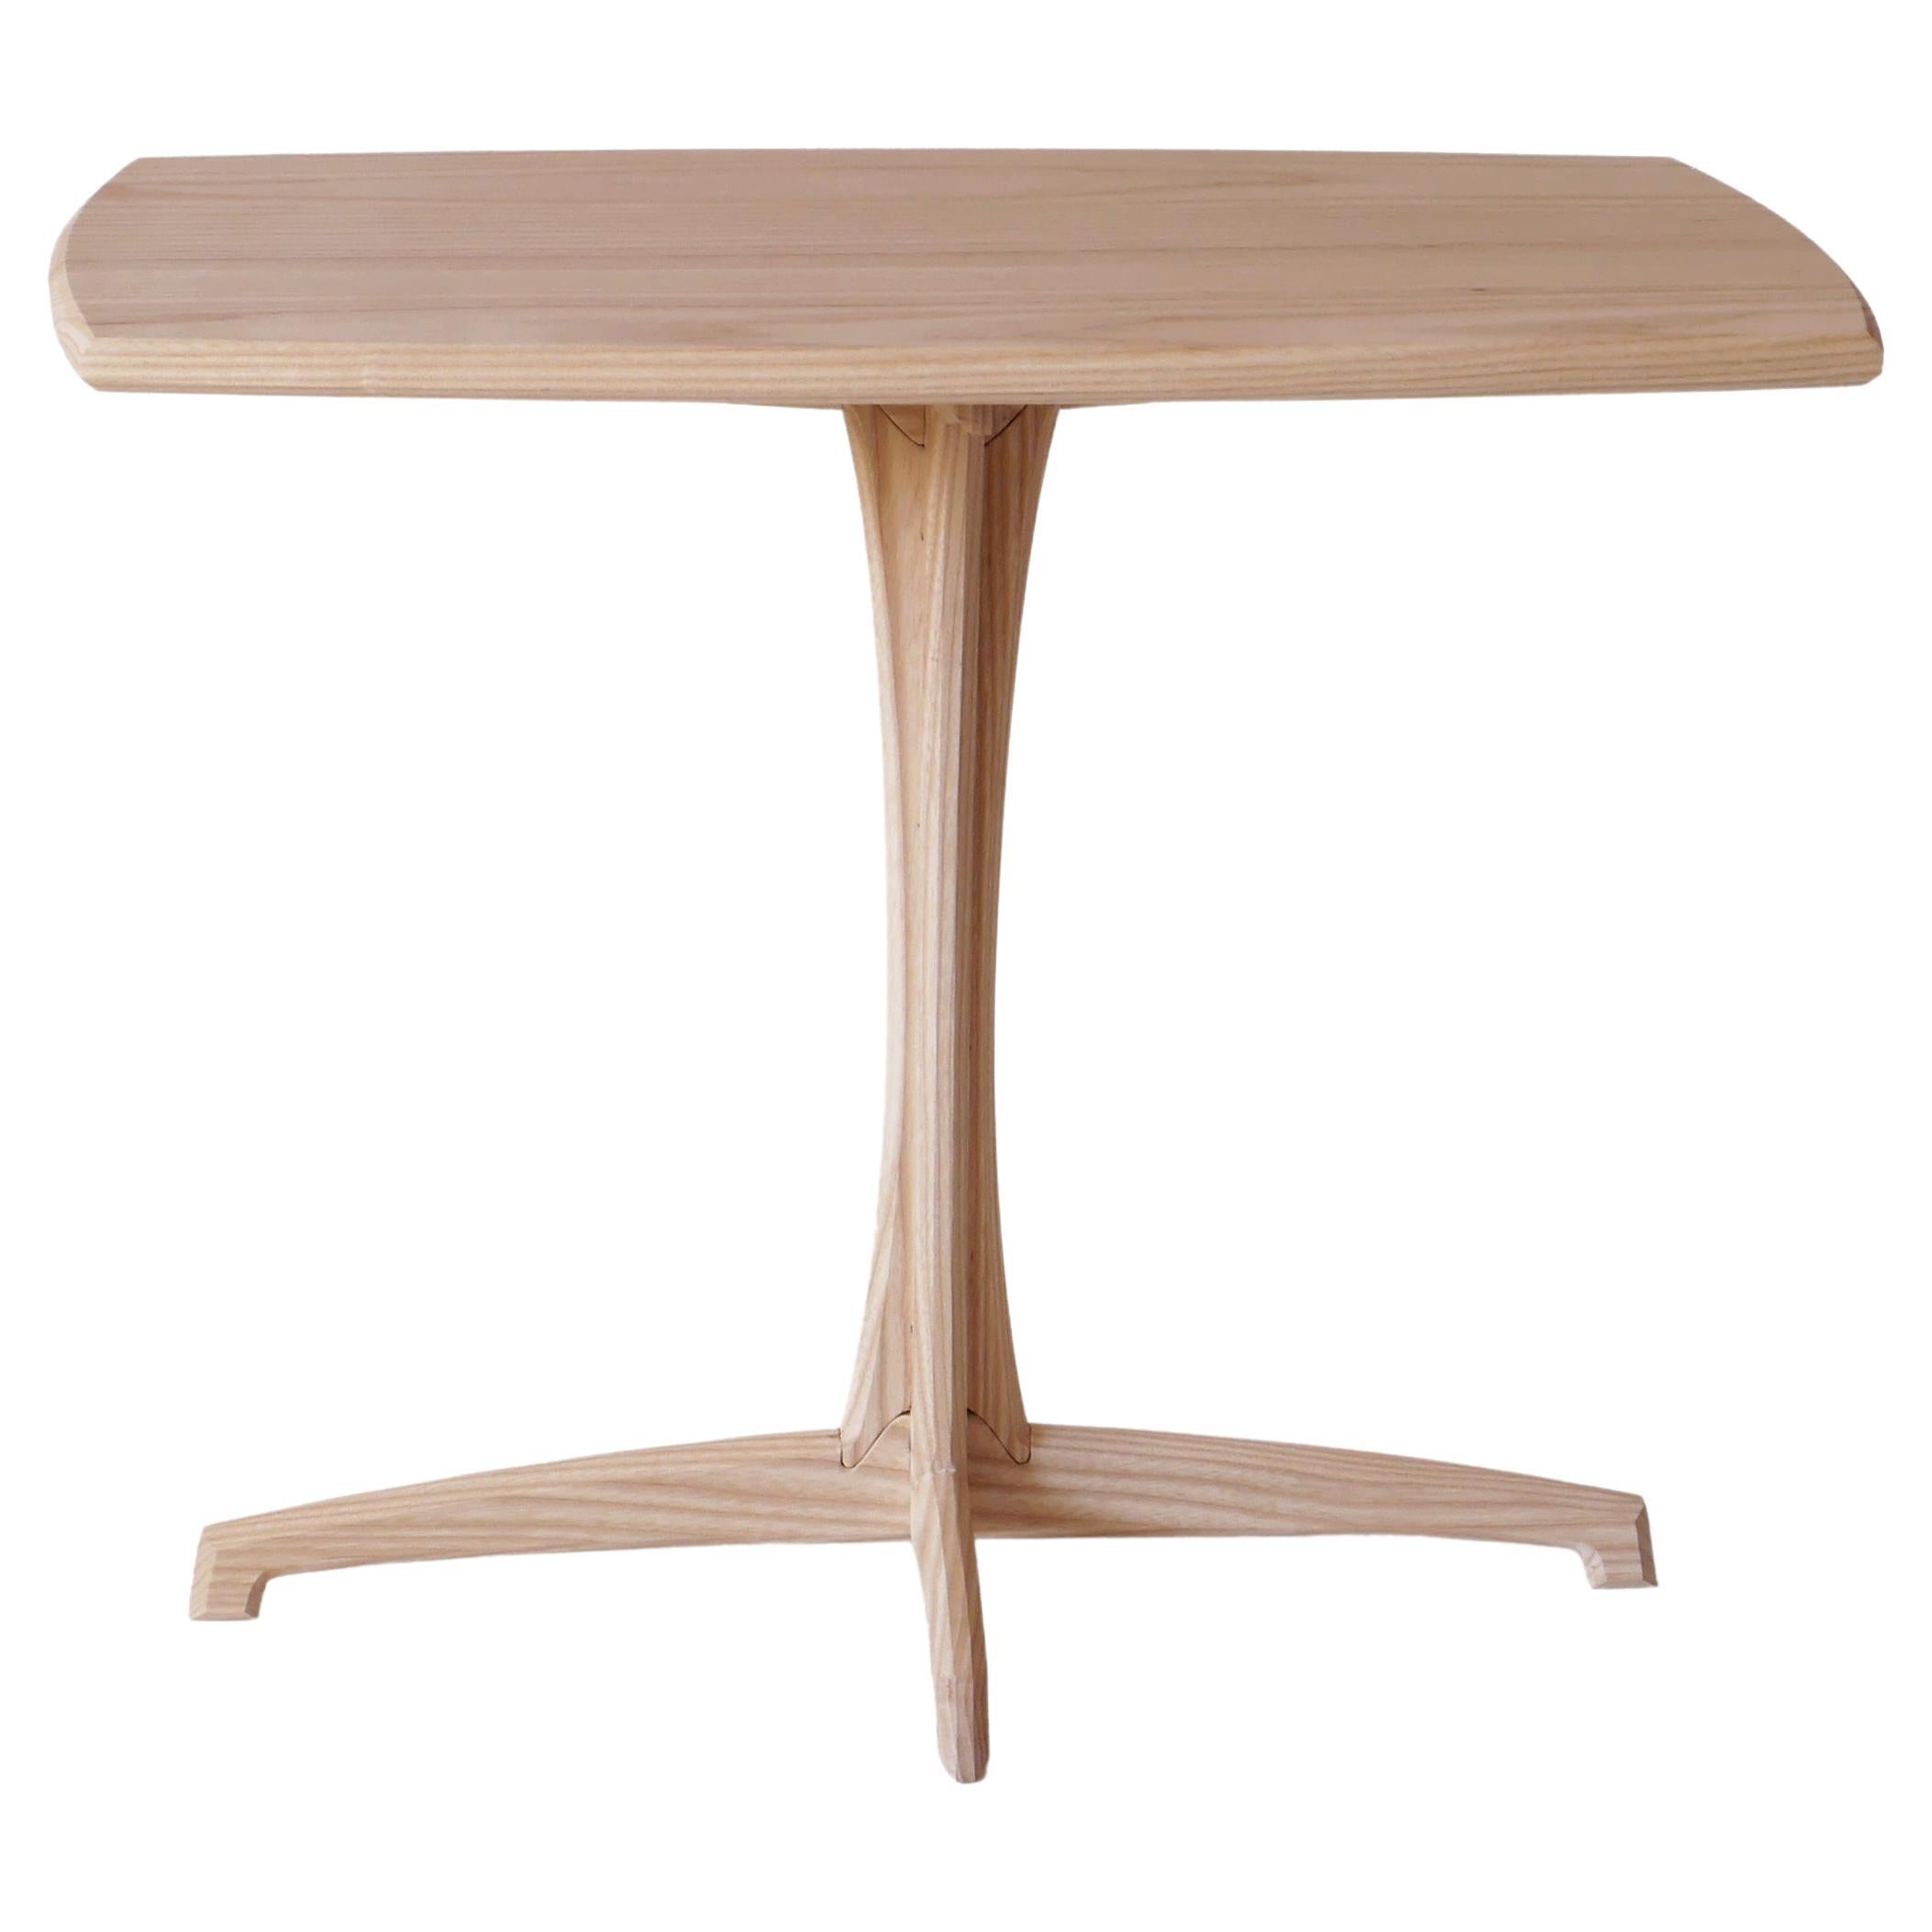 Ash Plume Side Table, Contemporary Handmade Pedestal End Table by Arid